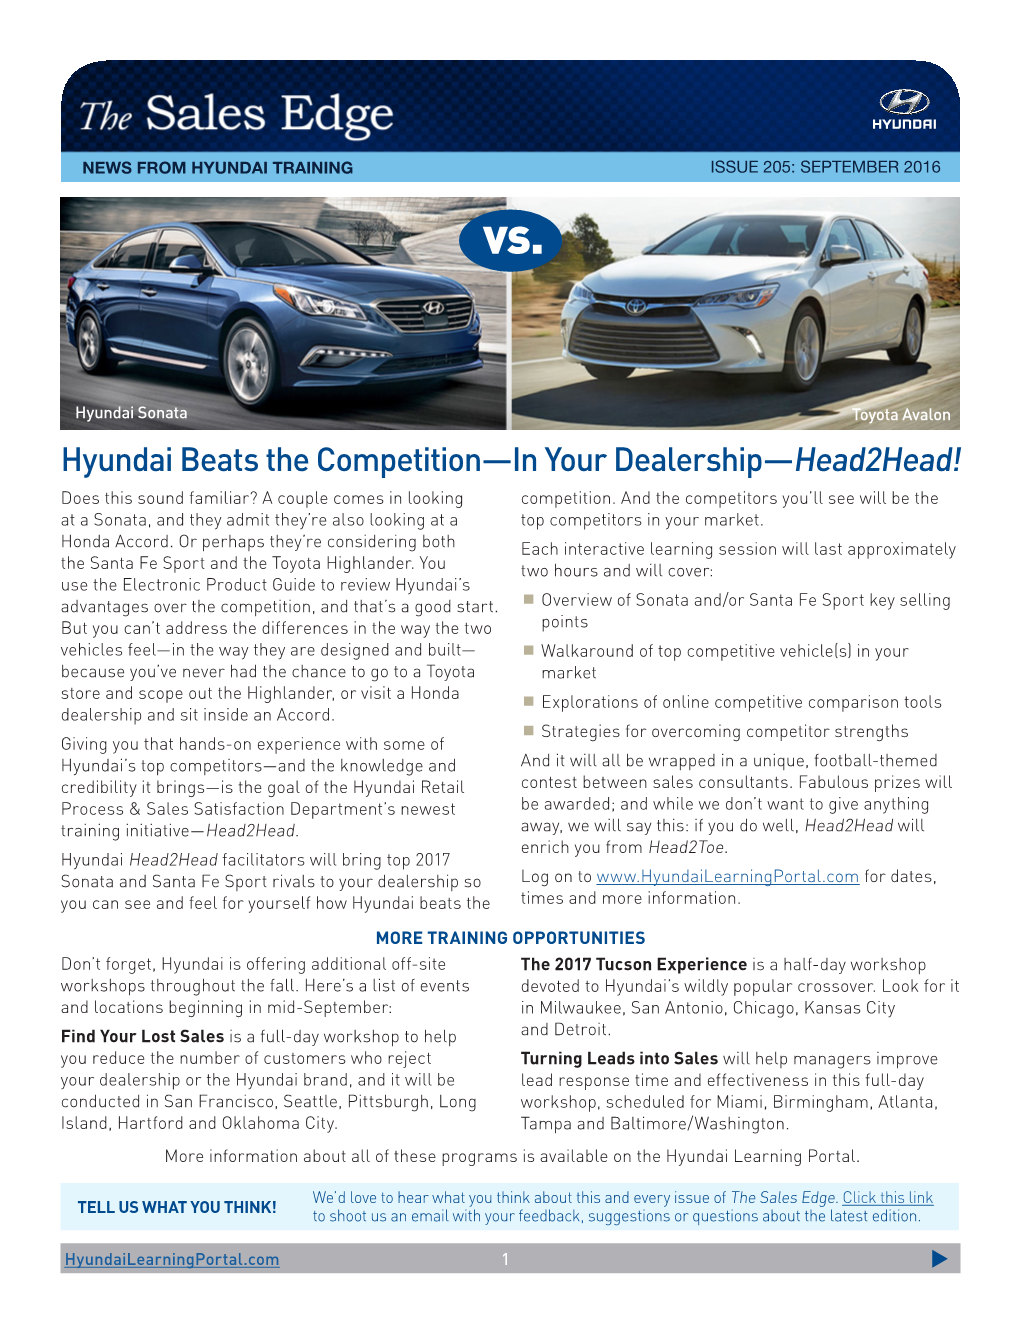 Hyundai Beats the Competition—In Your Dealership—Head2head! Does This Sound Familiar? a Couple Comes in Looking Competition